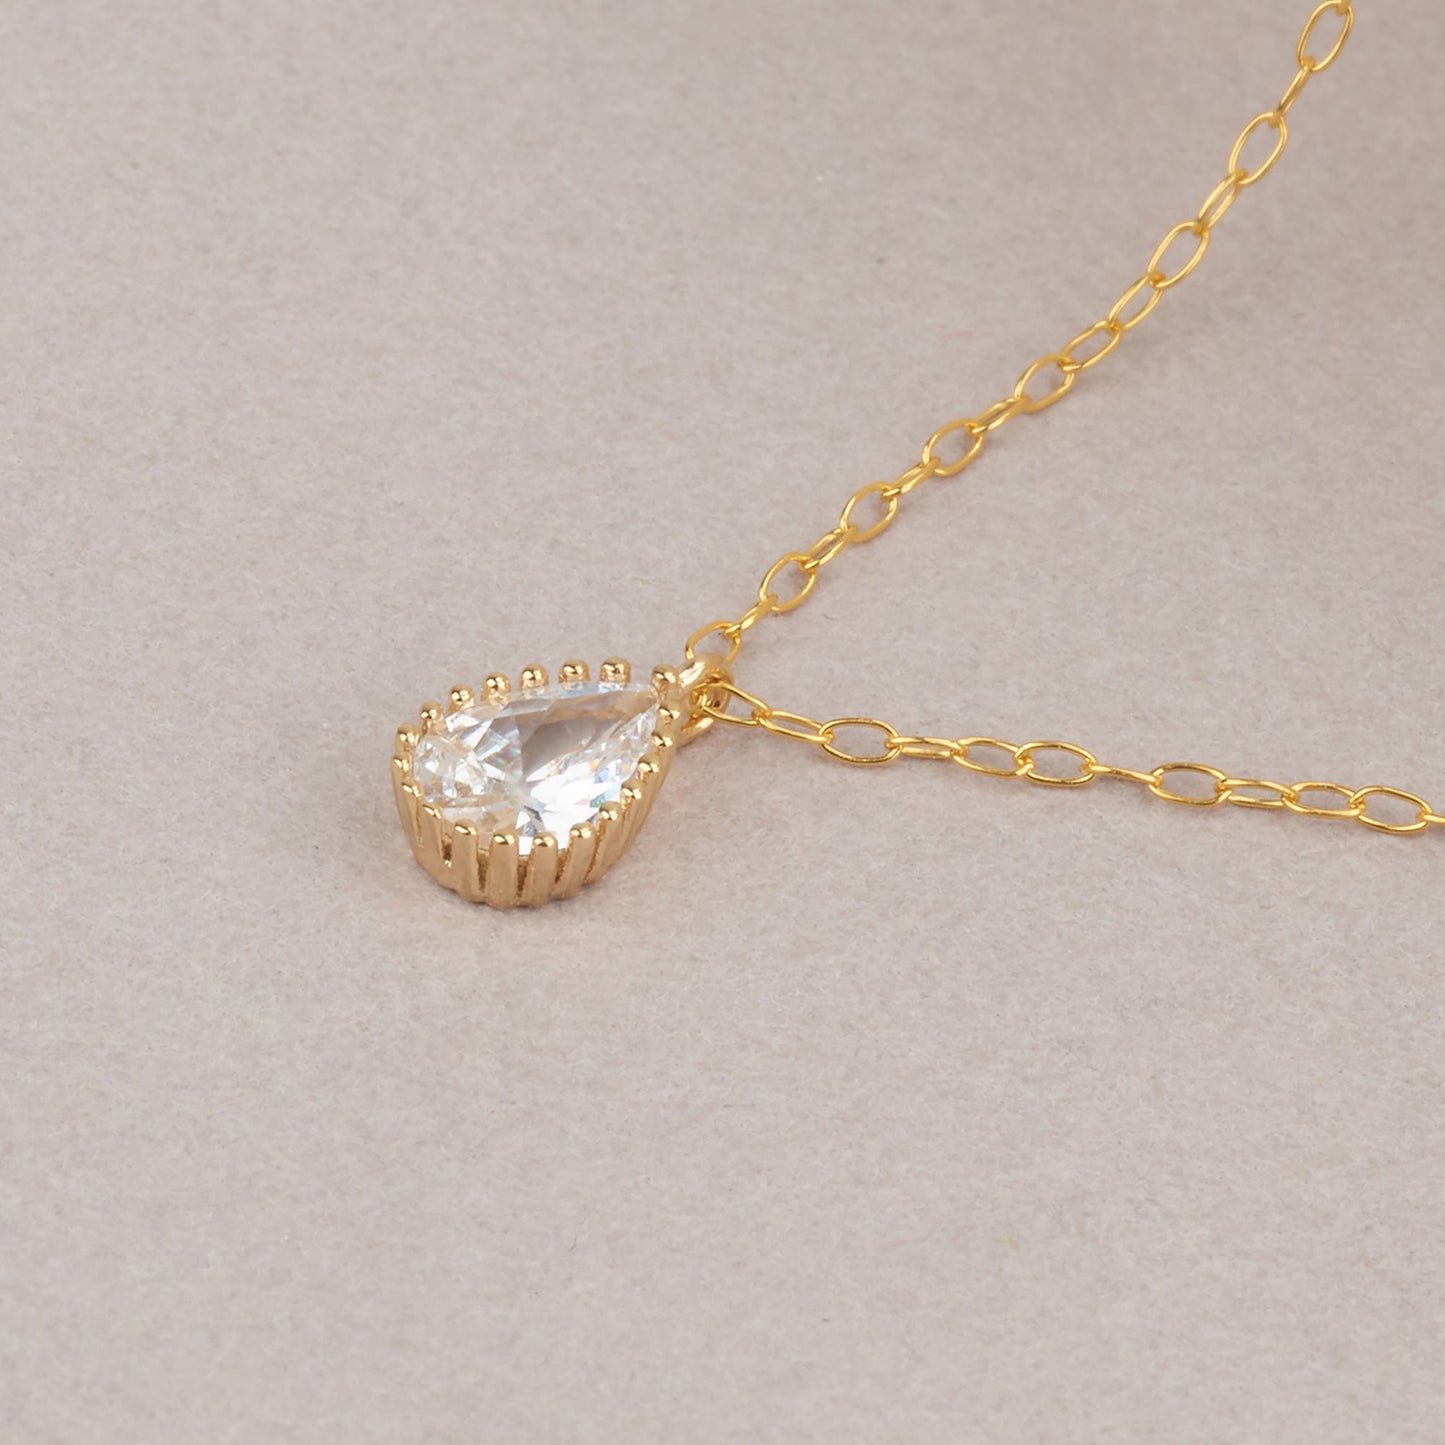 Delicate CZ Drop Necklace - HLcollection - Handmade Gold and Silver Jewelry